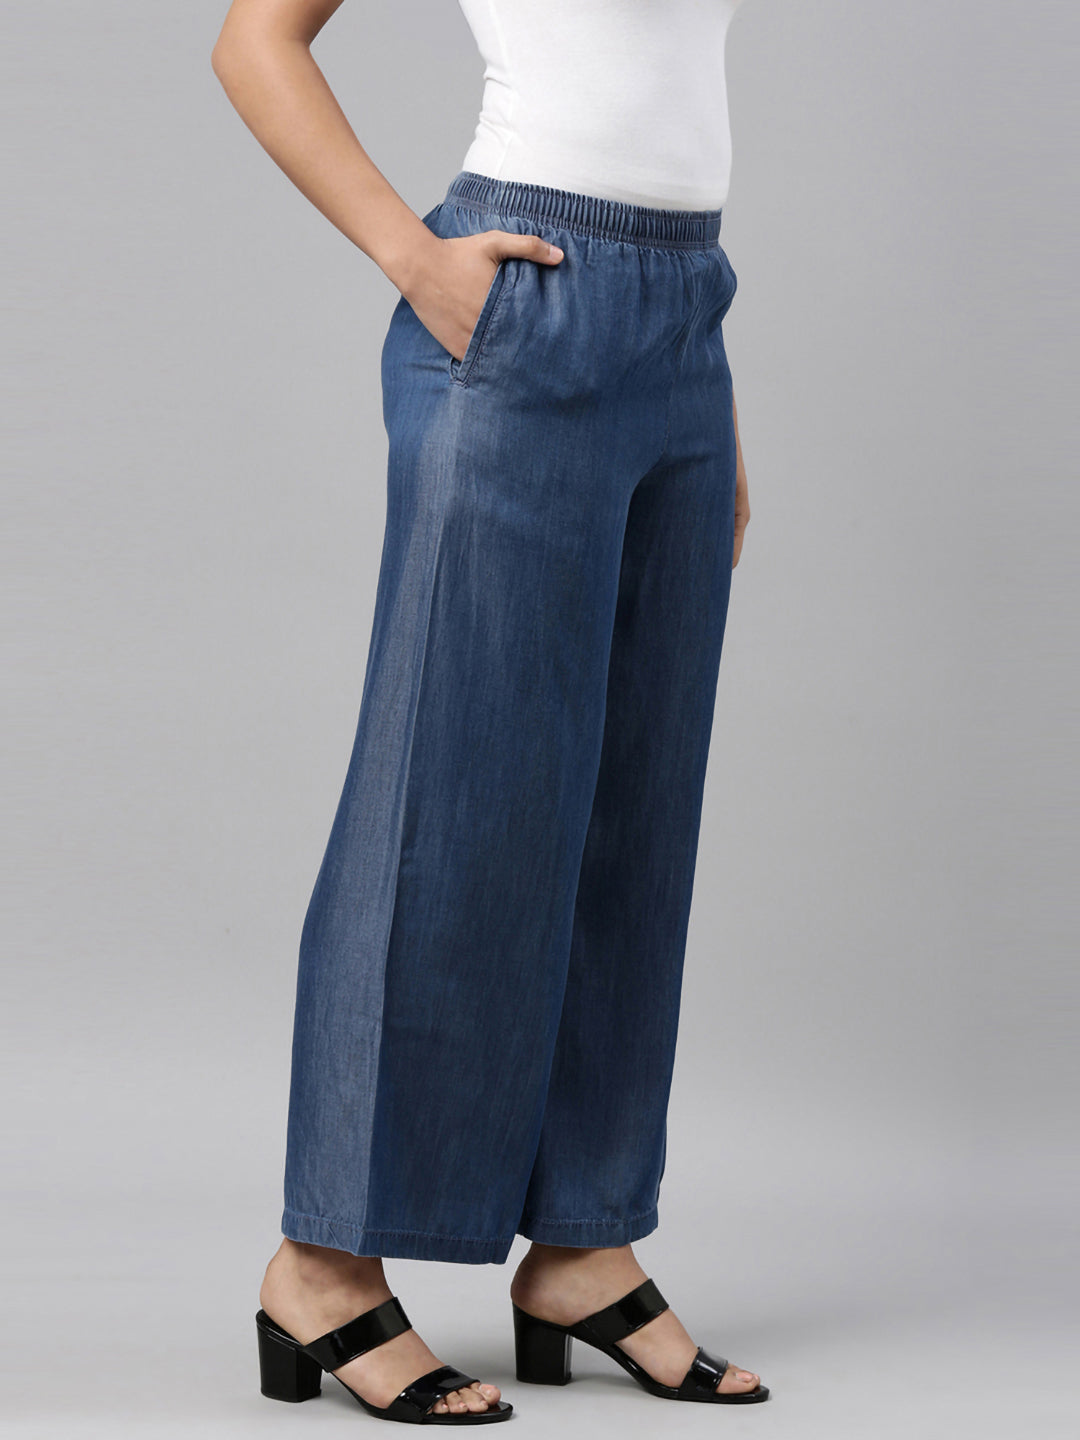 Crepe Party Wear Royal Blue Ankle Length Palazzo Pants